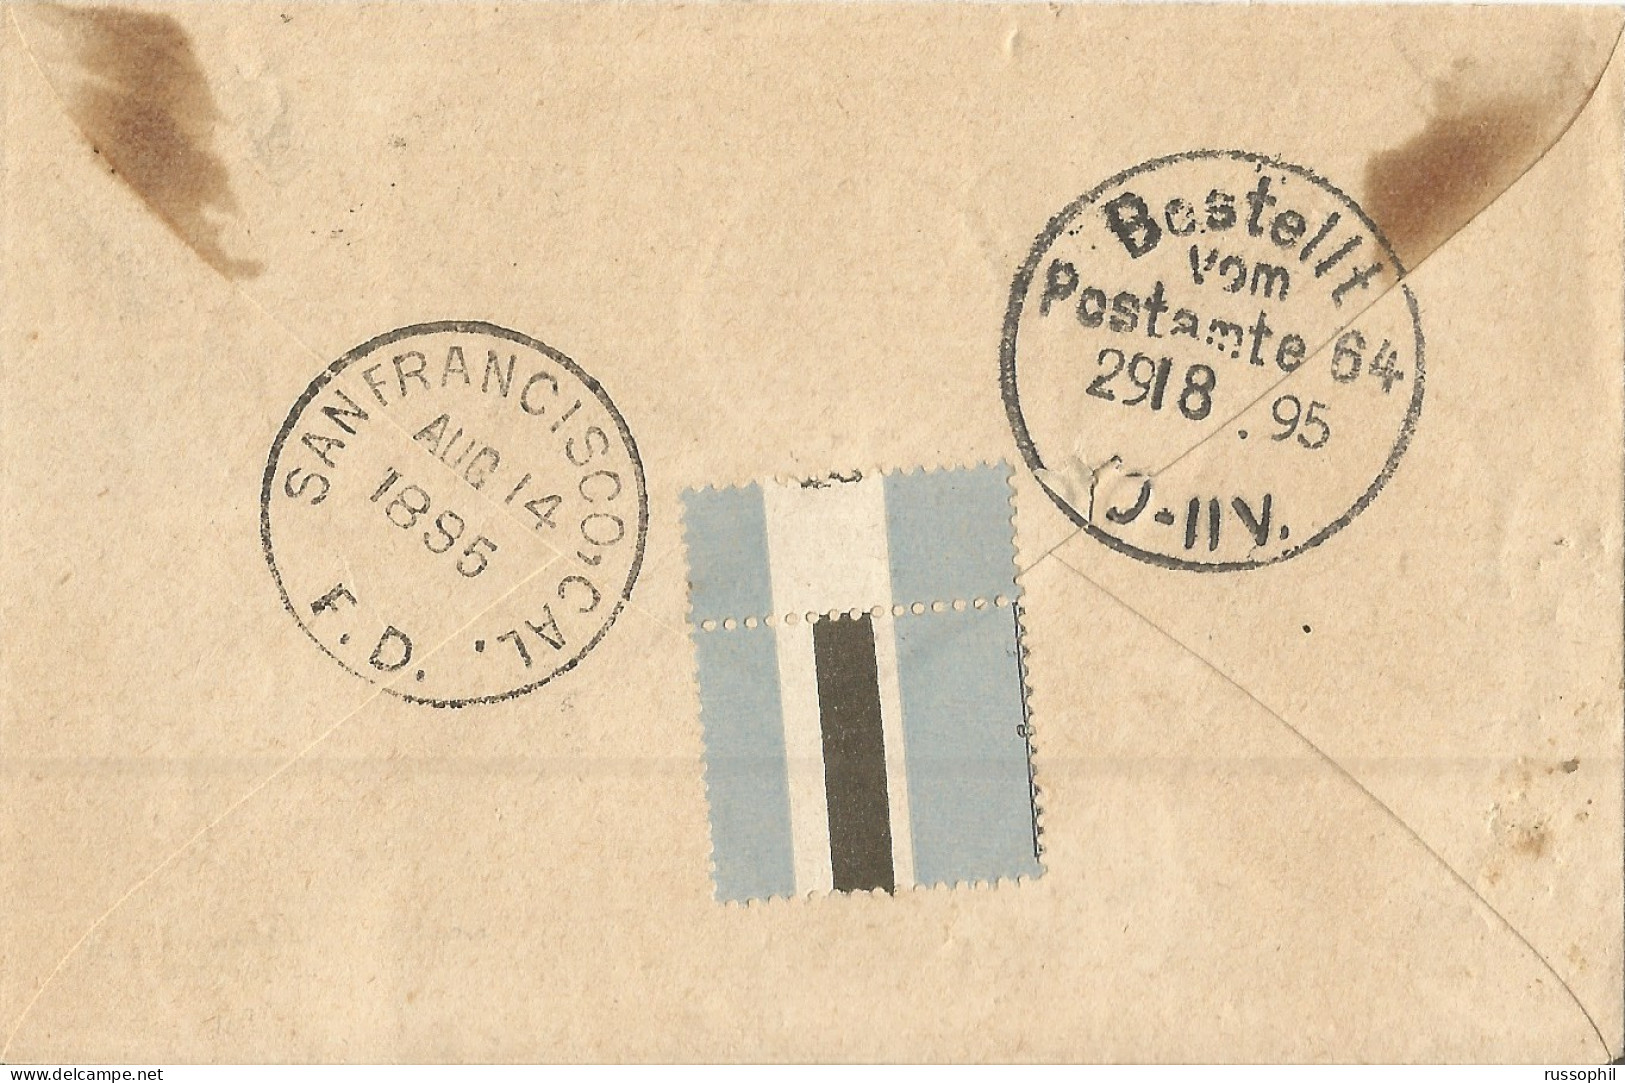 OCEANIE -  5 STAMP 20 CENT. UPRATED 5 CENT. POSTAL STATIONERY COVER FROM PAPEETE TO GERMANY - 1895 - Storia Postale